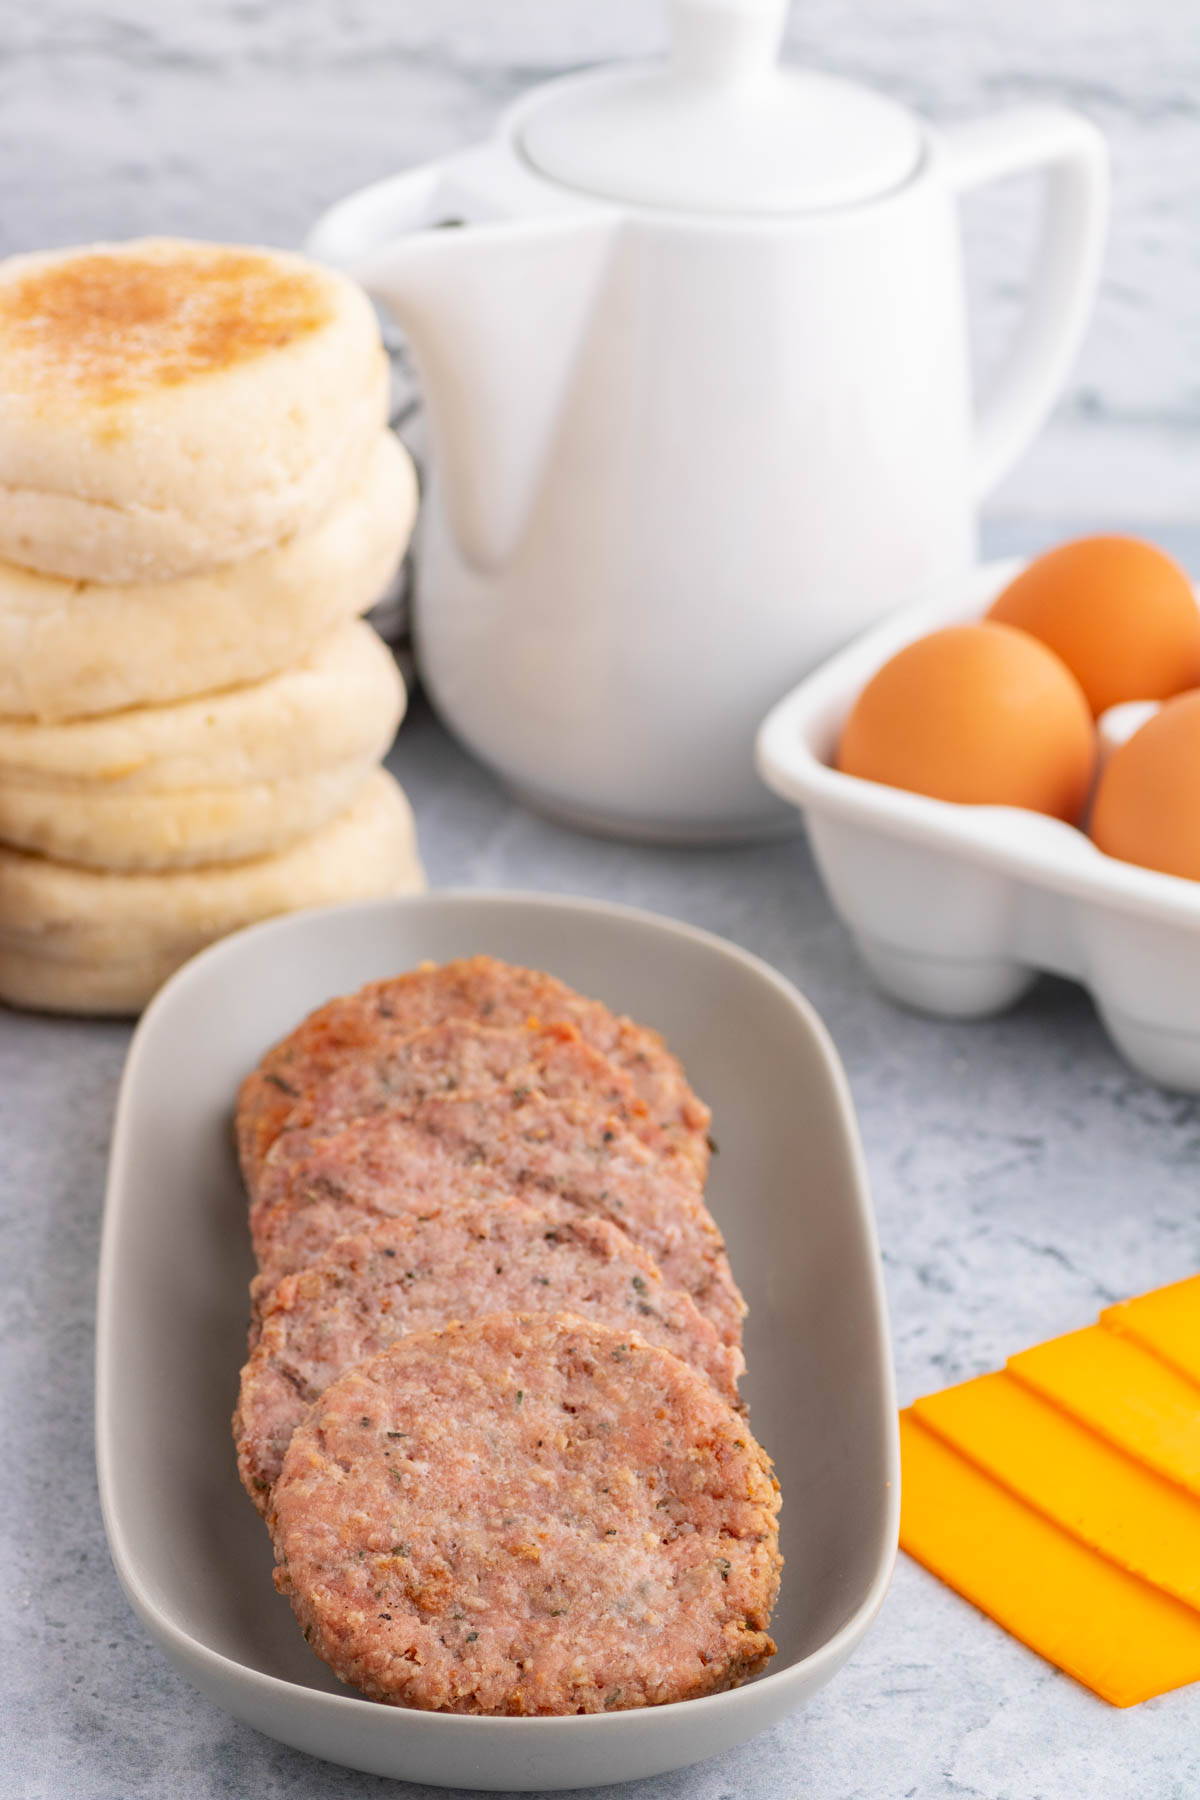 A tray of smoked breakfast sausage patties surrounded by the ingredients for breakfast sandwiches.